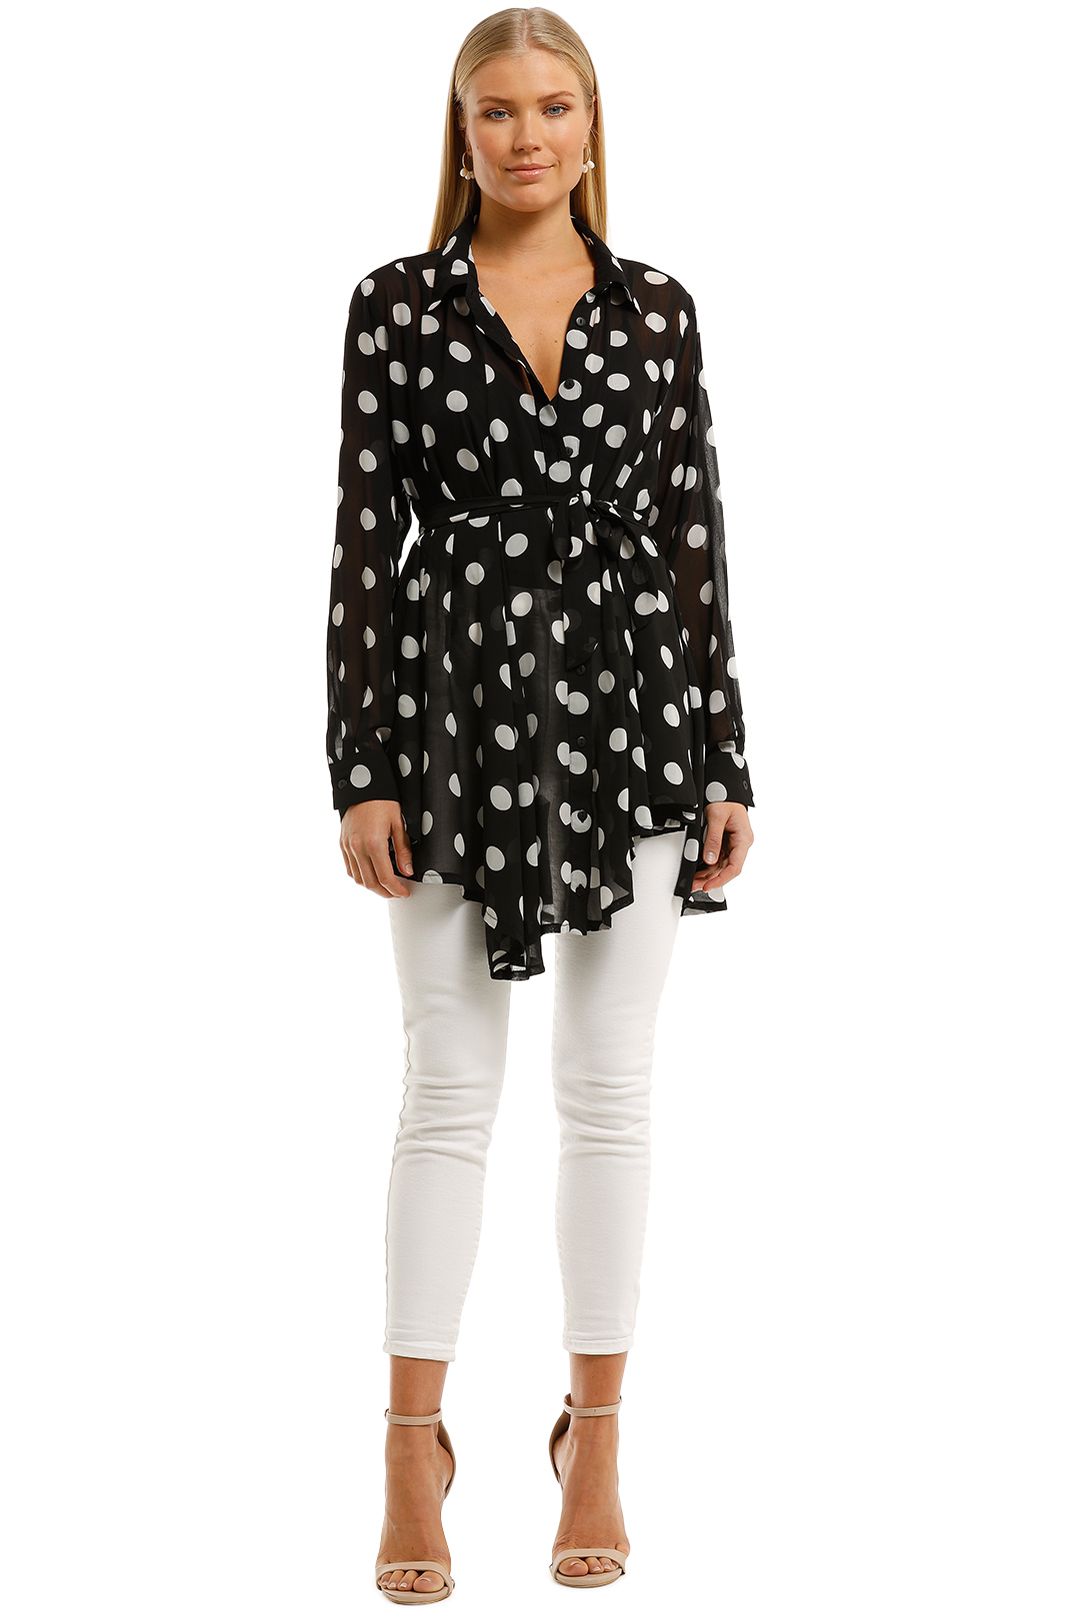 Curate-by-Trelise-Cooper-Collar-Back-Girl-Shirt-Spots-Front